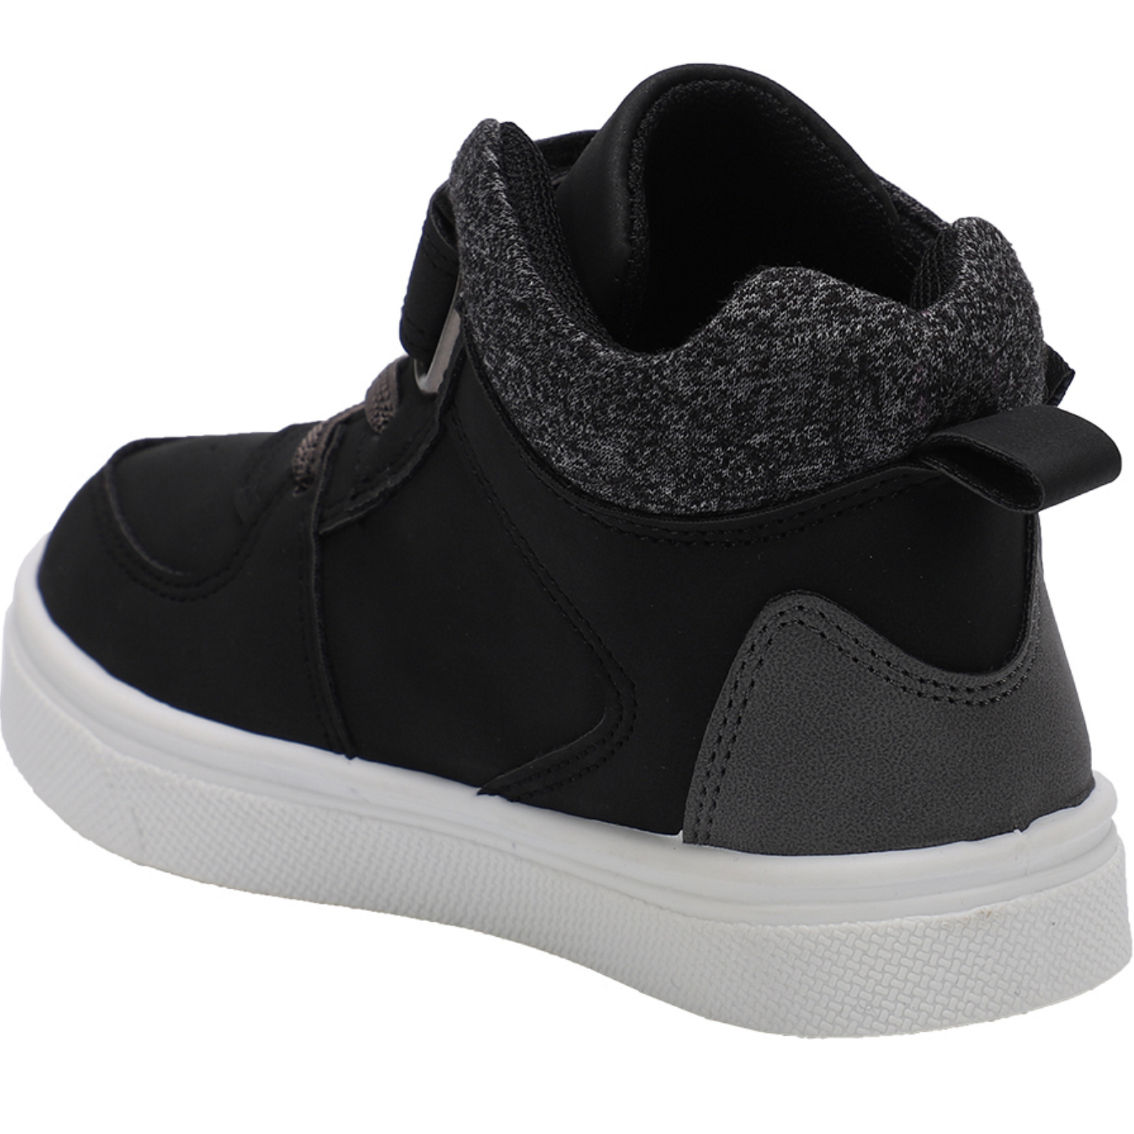 Oomphies Toddler Boys Jax High Top Shoes - Image 2 of 4